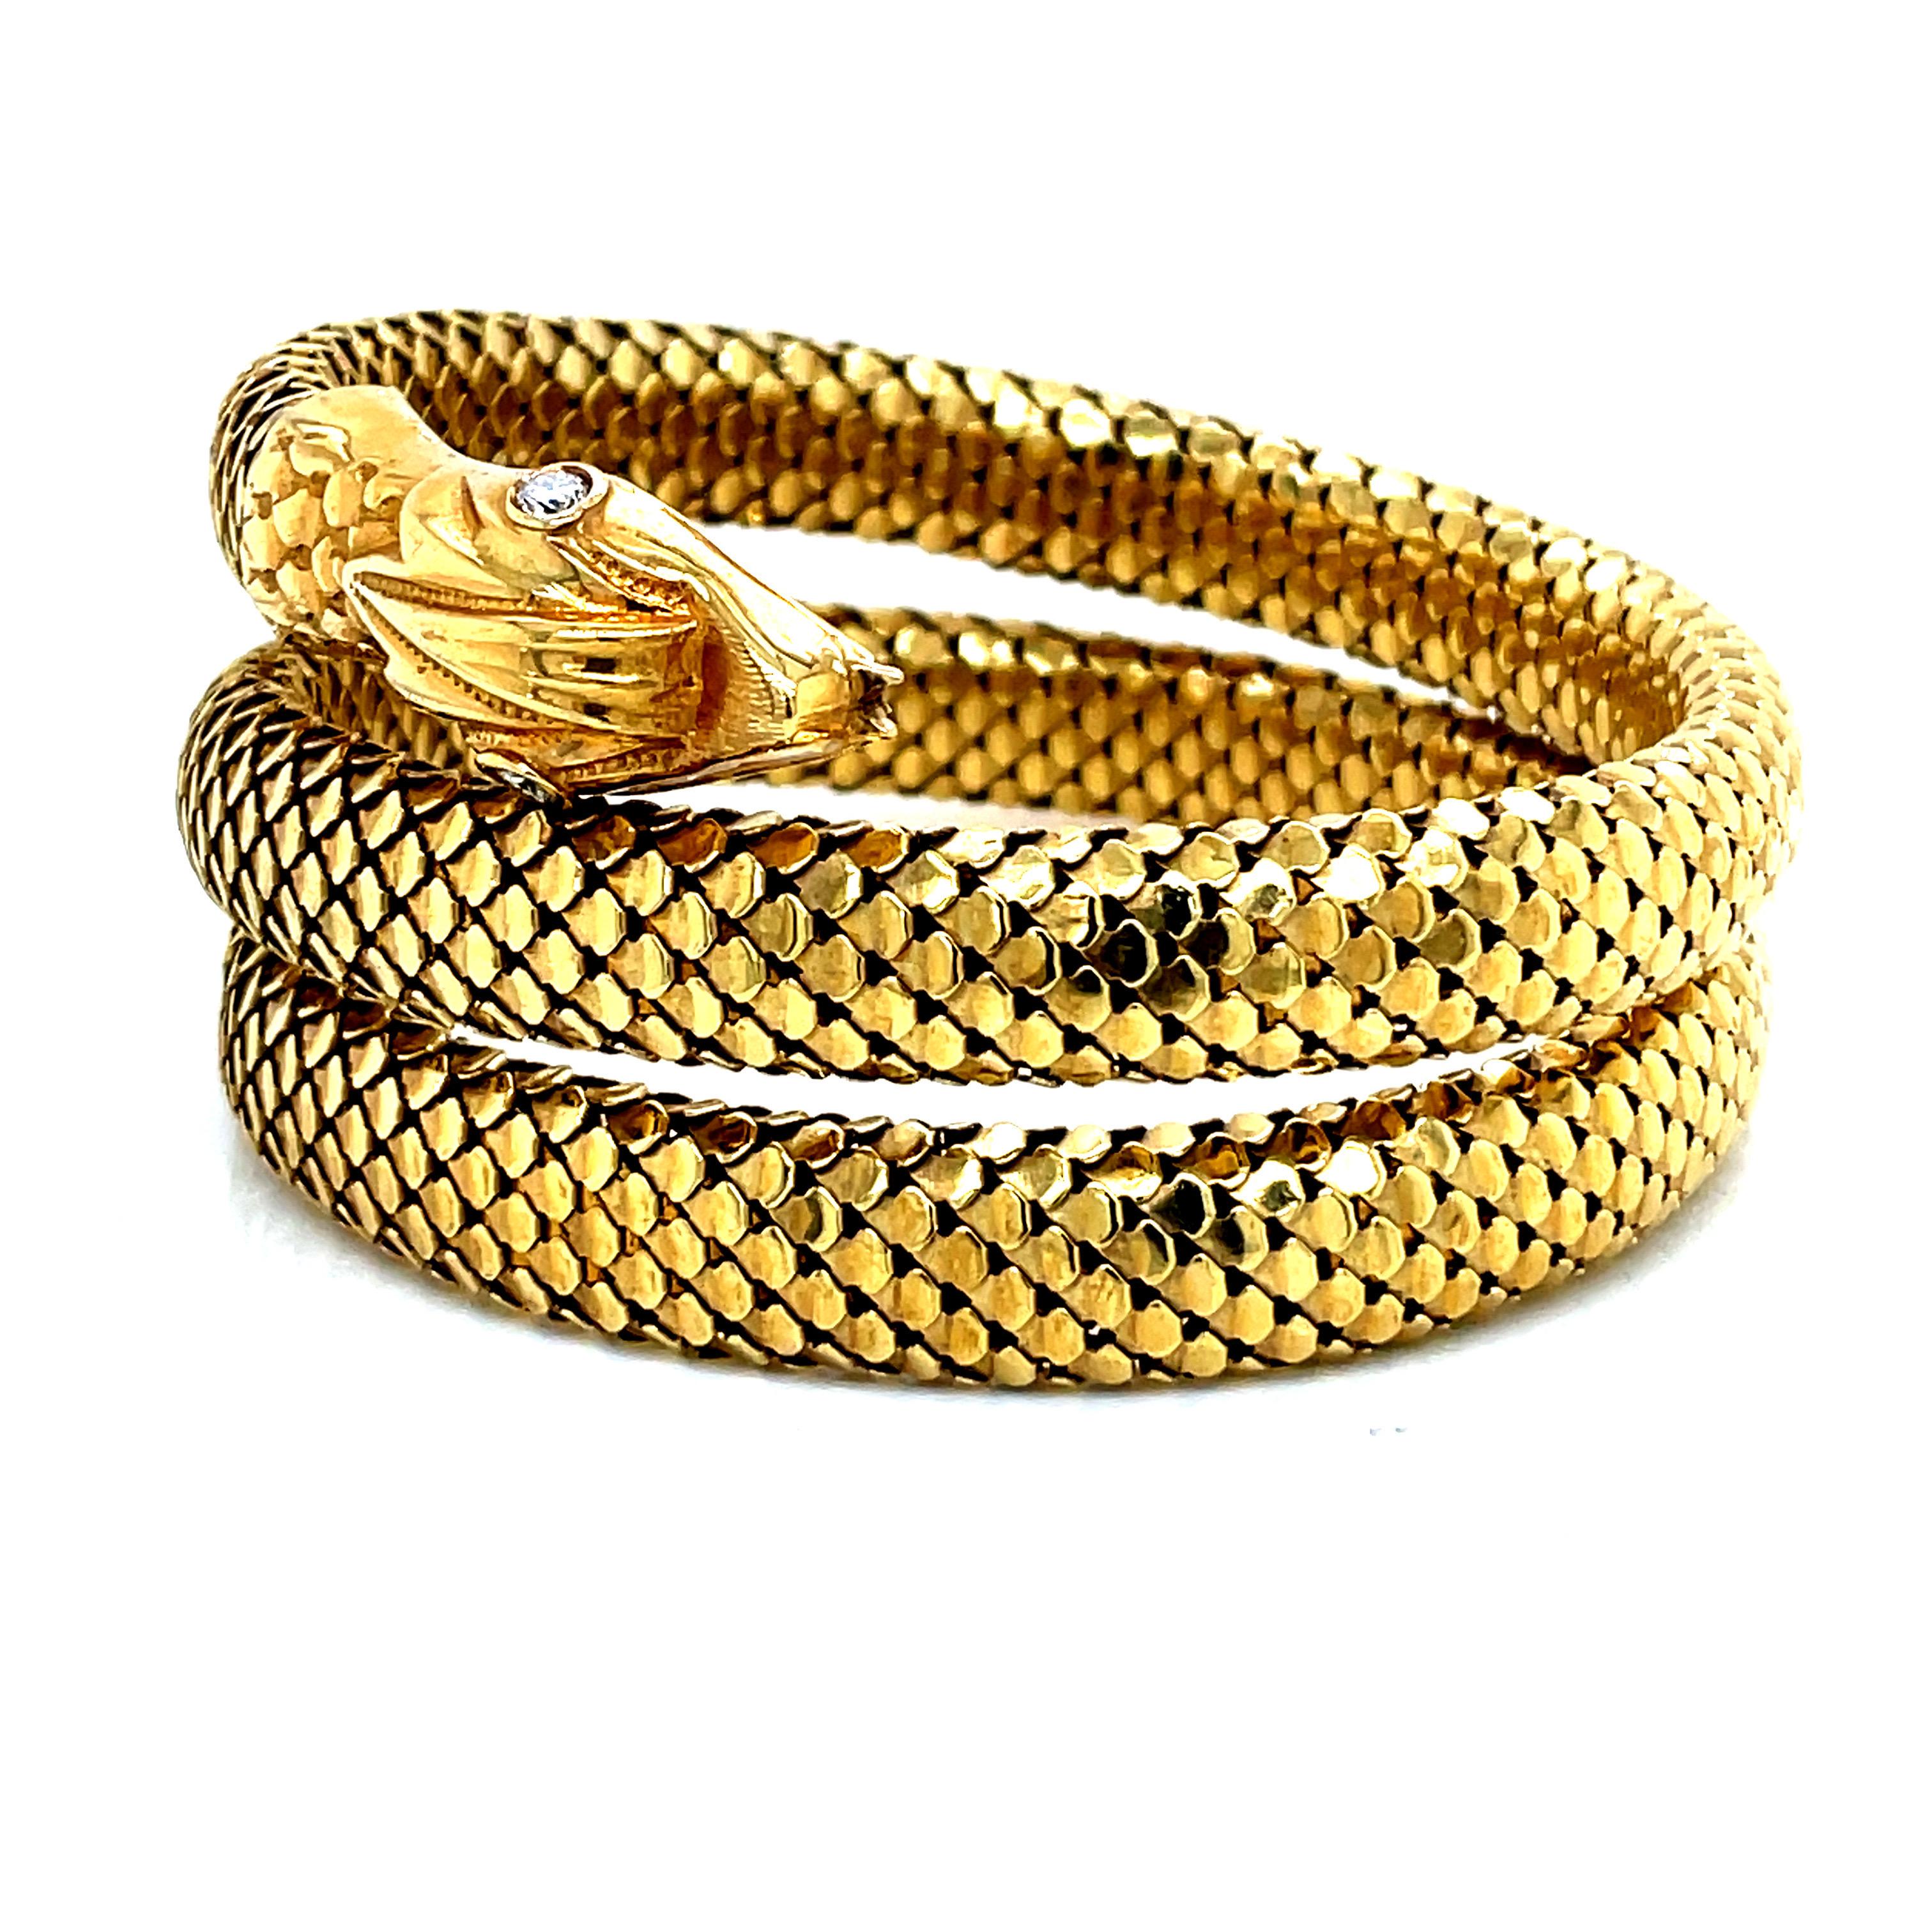 The vintage snake bracelet is a striking and intricate 18k yellow gold piece showcasing exceptional craftsmanship. The flexible mesh design allows it to be worn as a bracelet or an armband, adapting to different wrist and arm sizes. With a width of